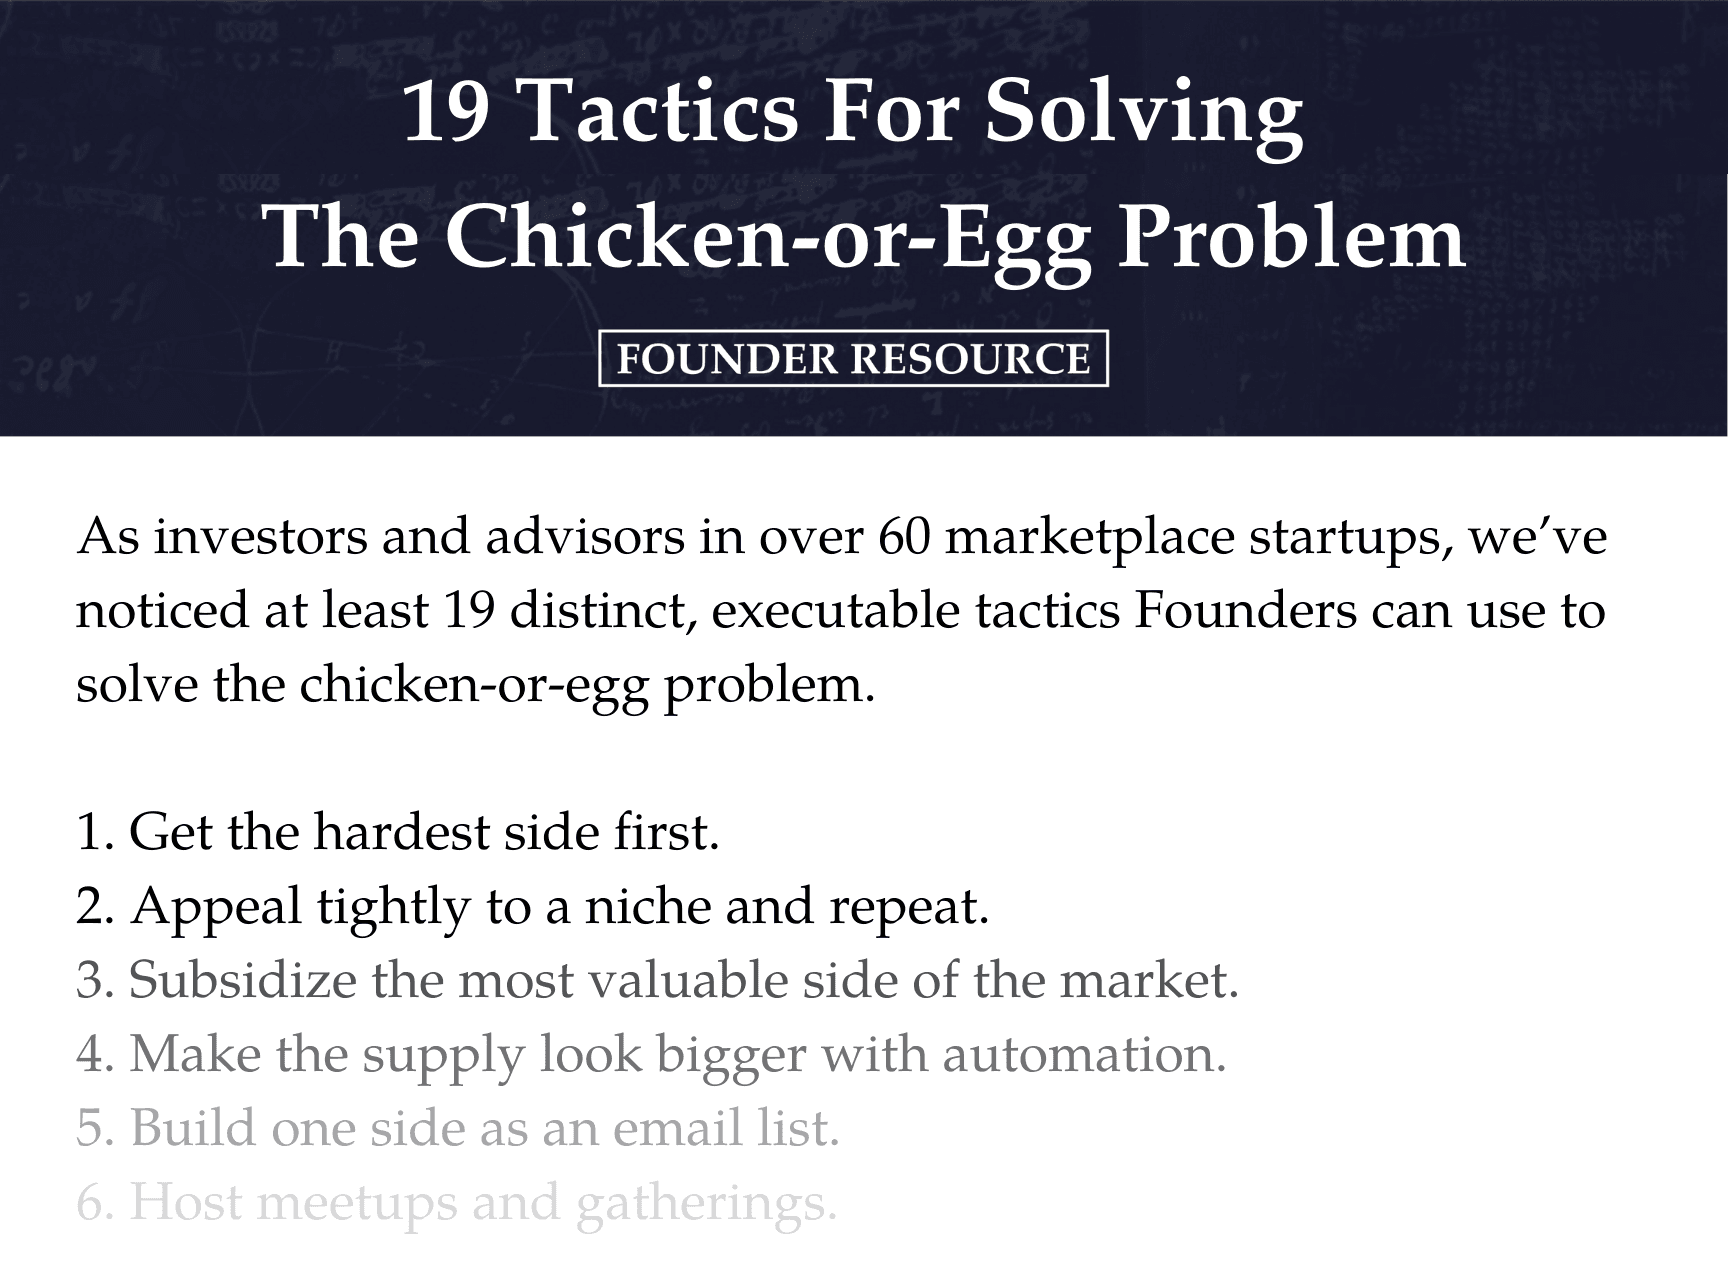 19 Tactics For Solving The Chicken-or-Egg Problem -- Content Upgrade Visual